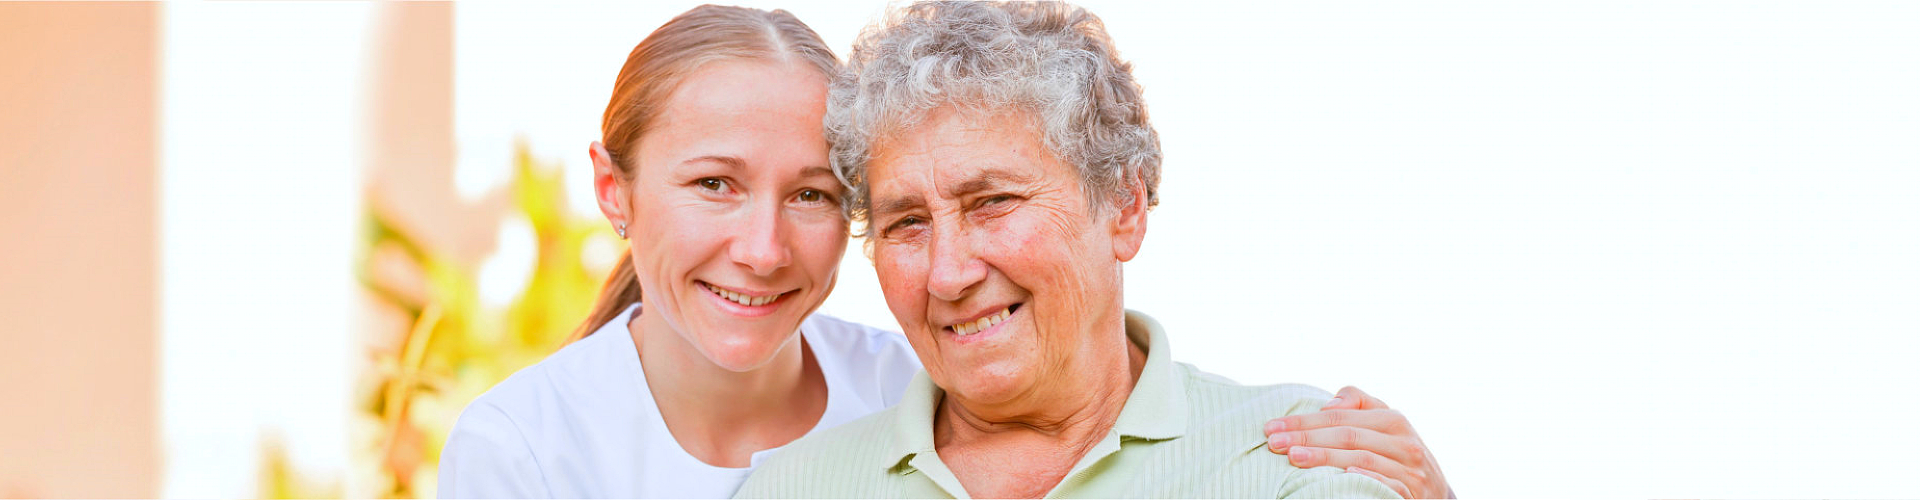 smiling old woman and caregiver